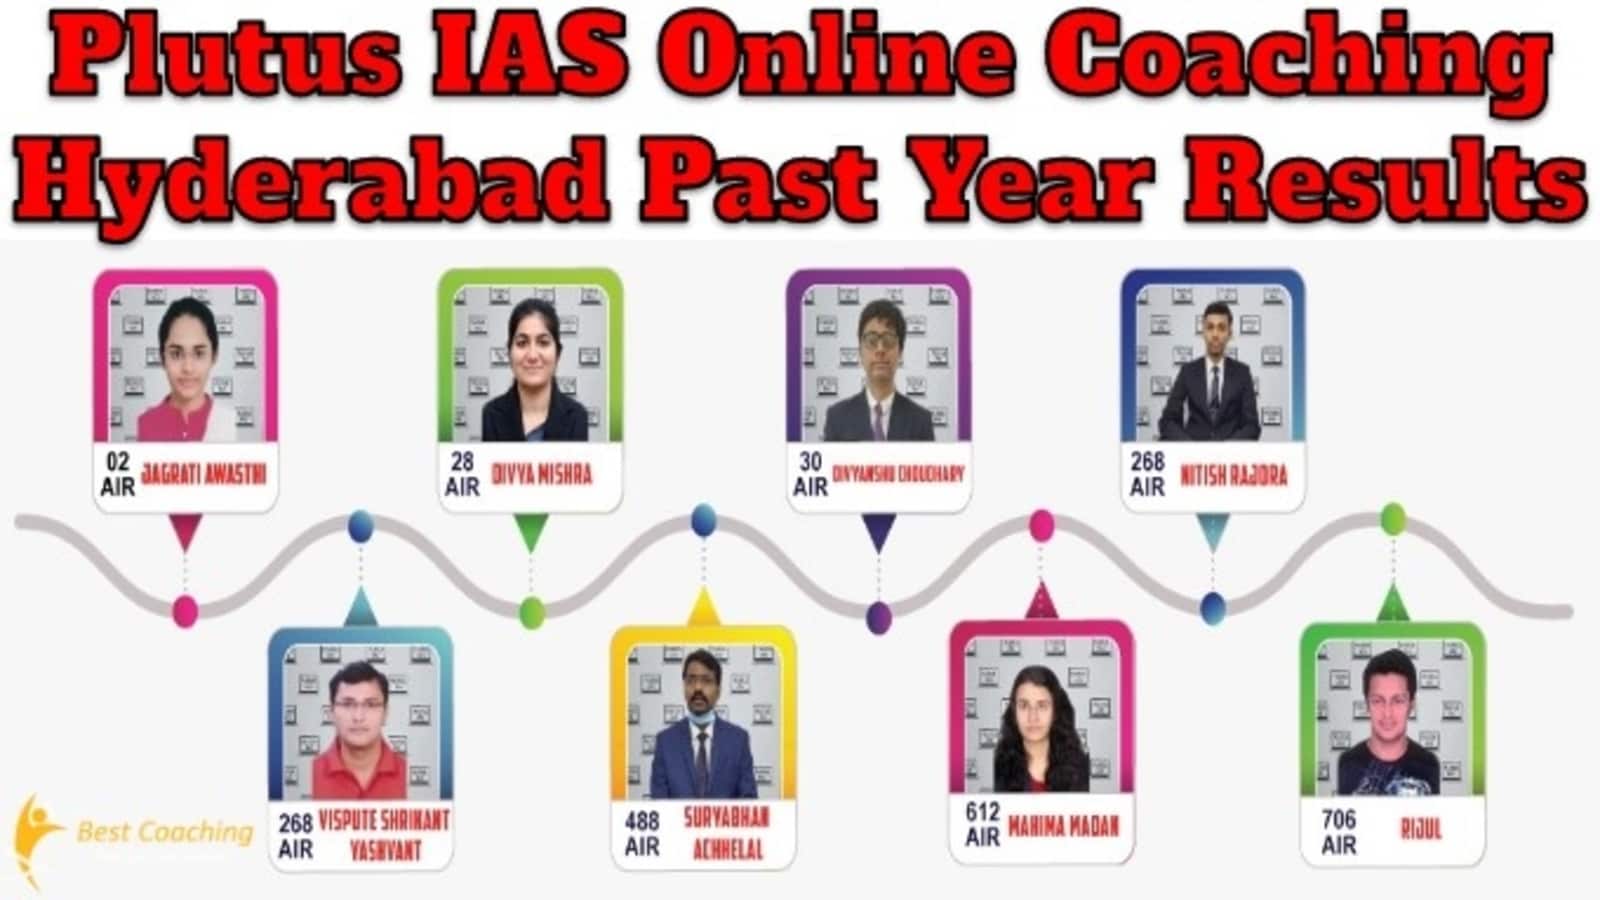 Plutus IAS Online Coaching Hyderabad Past Year Results